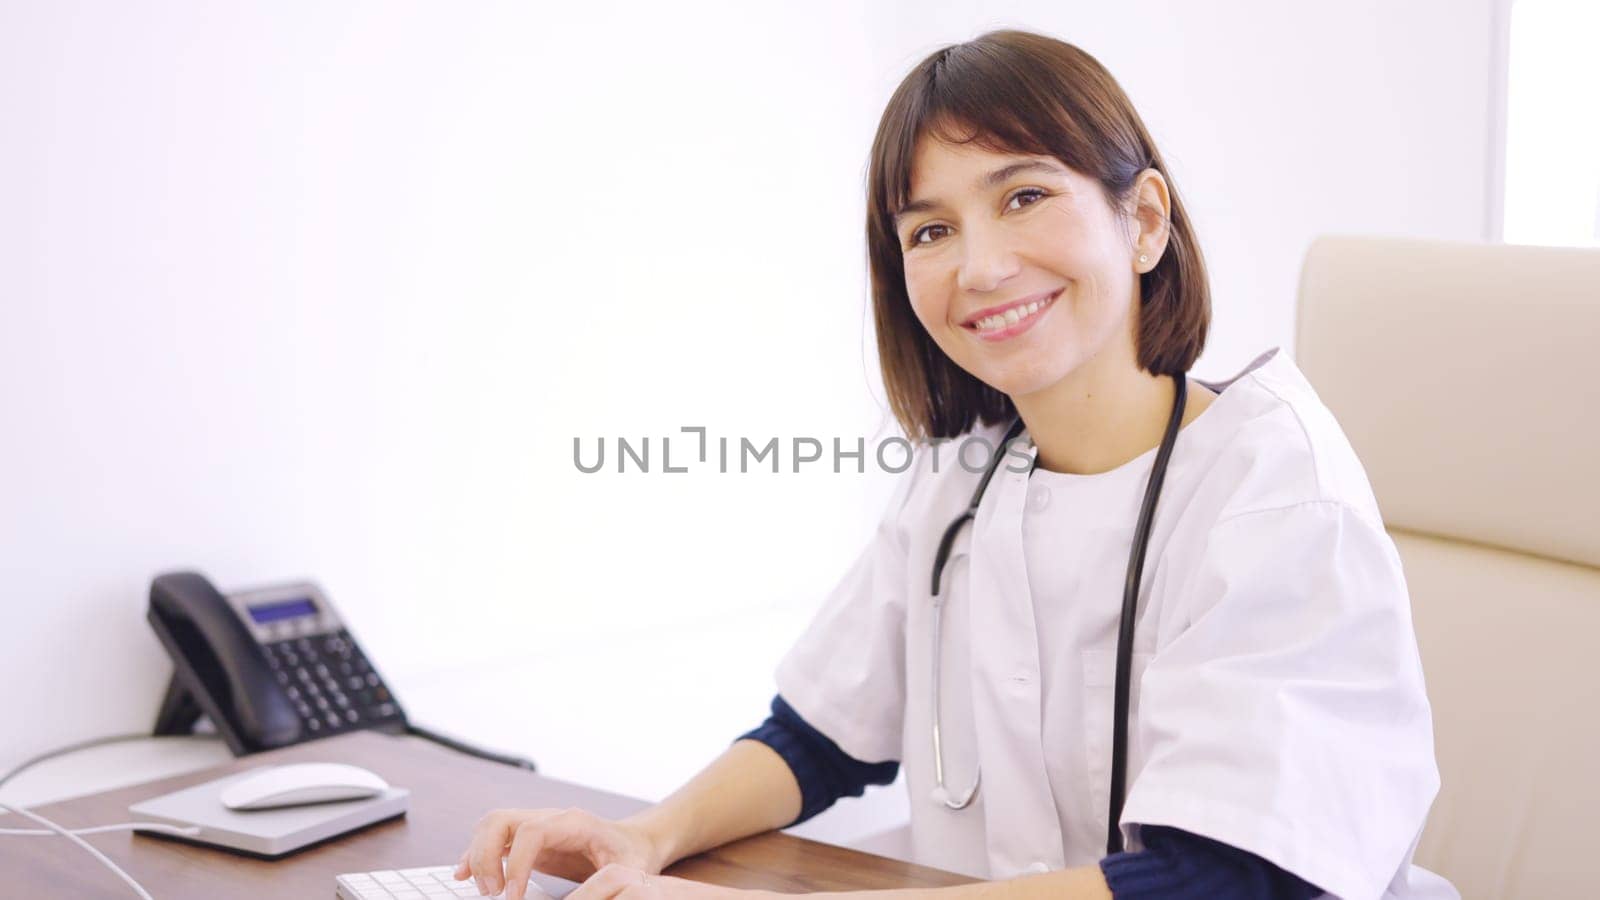 Female doctor using computer and smiling at camera by ivanmoreno